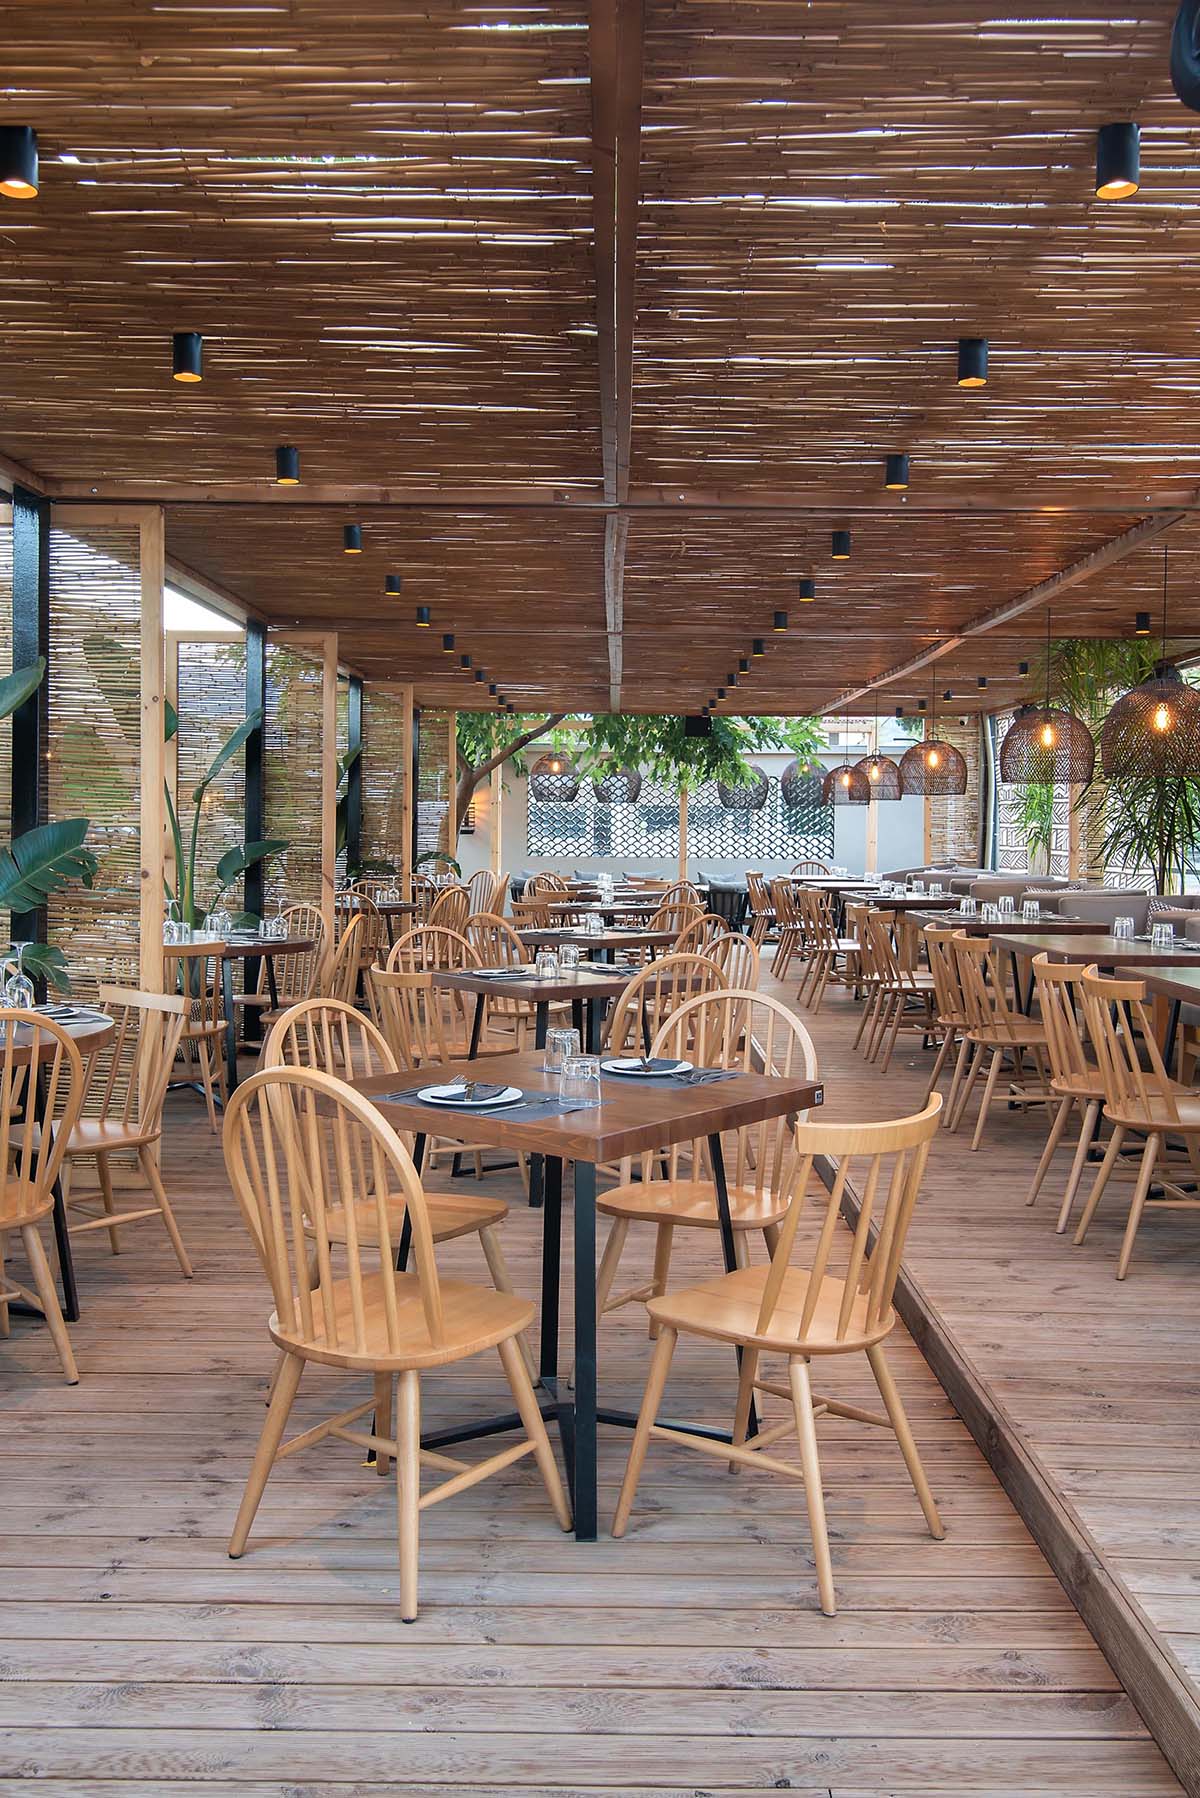 A modern outdoor restaurant with reed screens that provide shade and create a beach aesthetic.